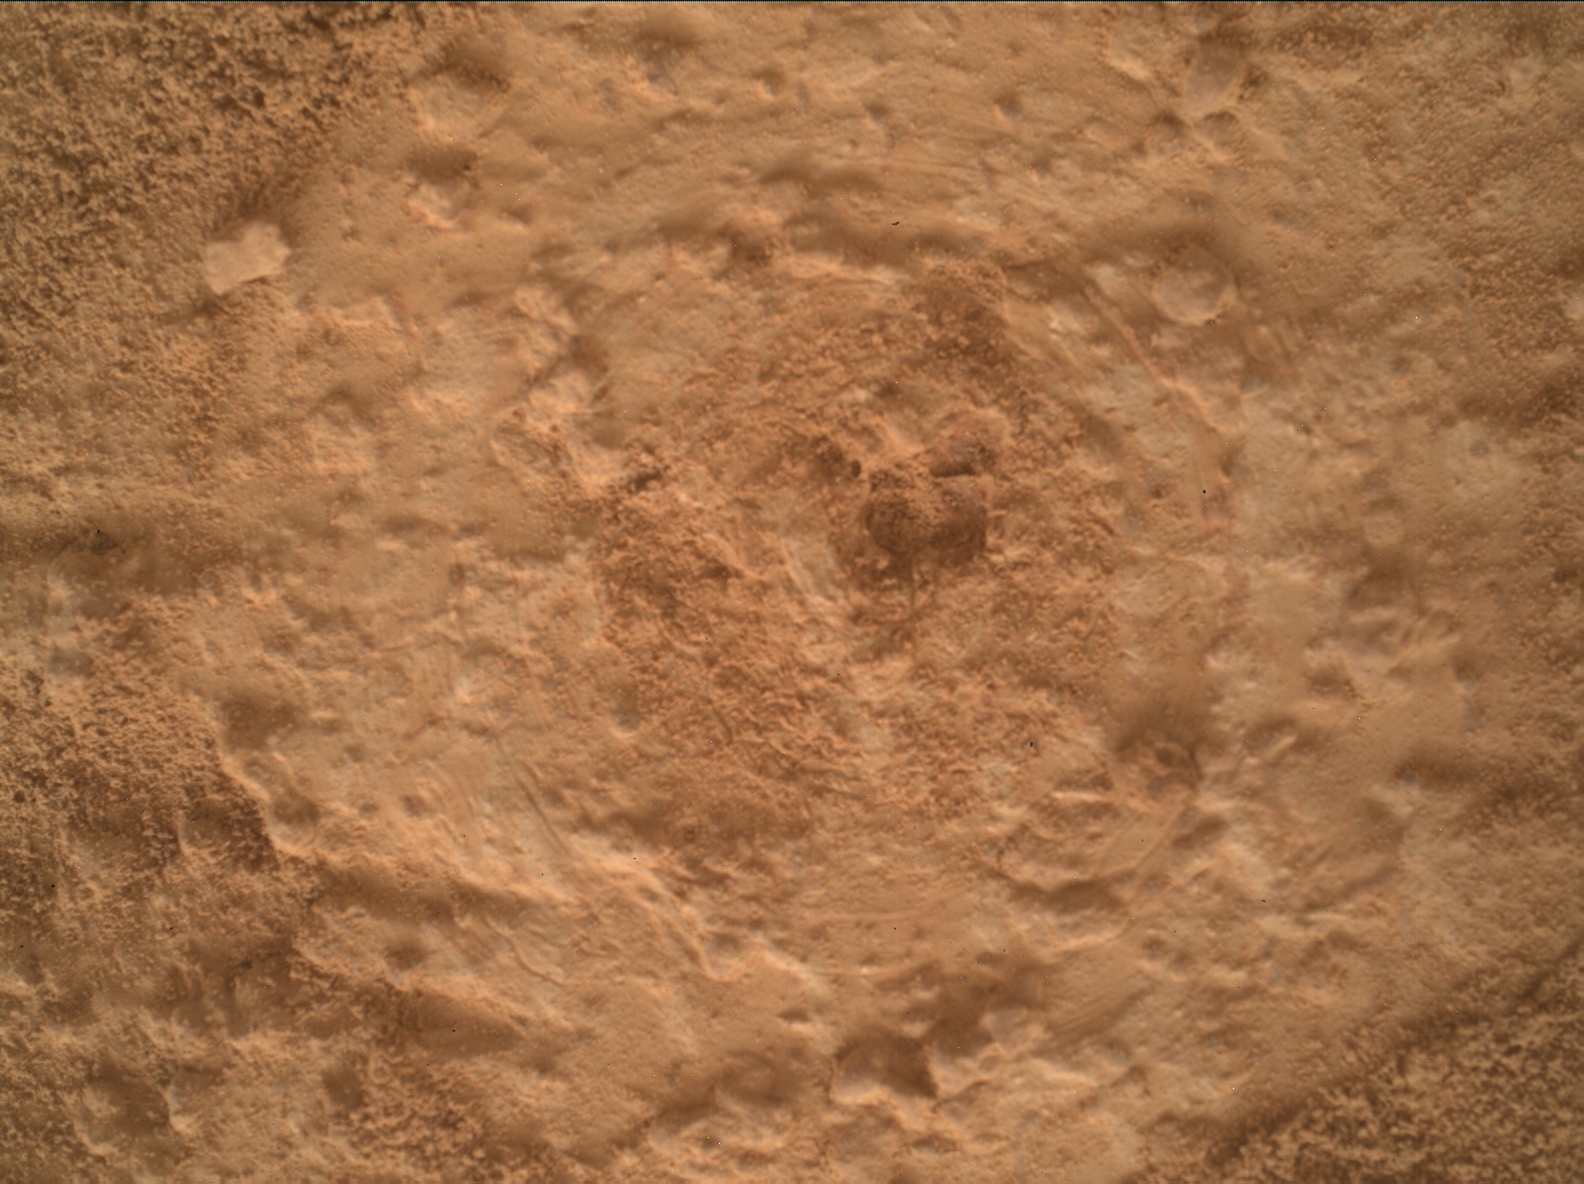 Nasa's Mars rover Curiosity acquired this image using its Mars Hand Lens Imager (MAHLI) on Sol 3471